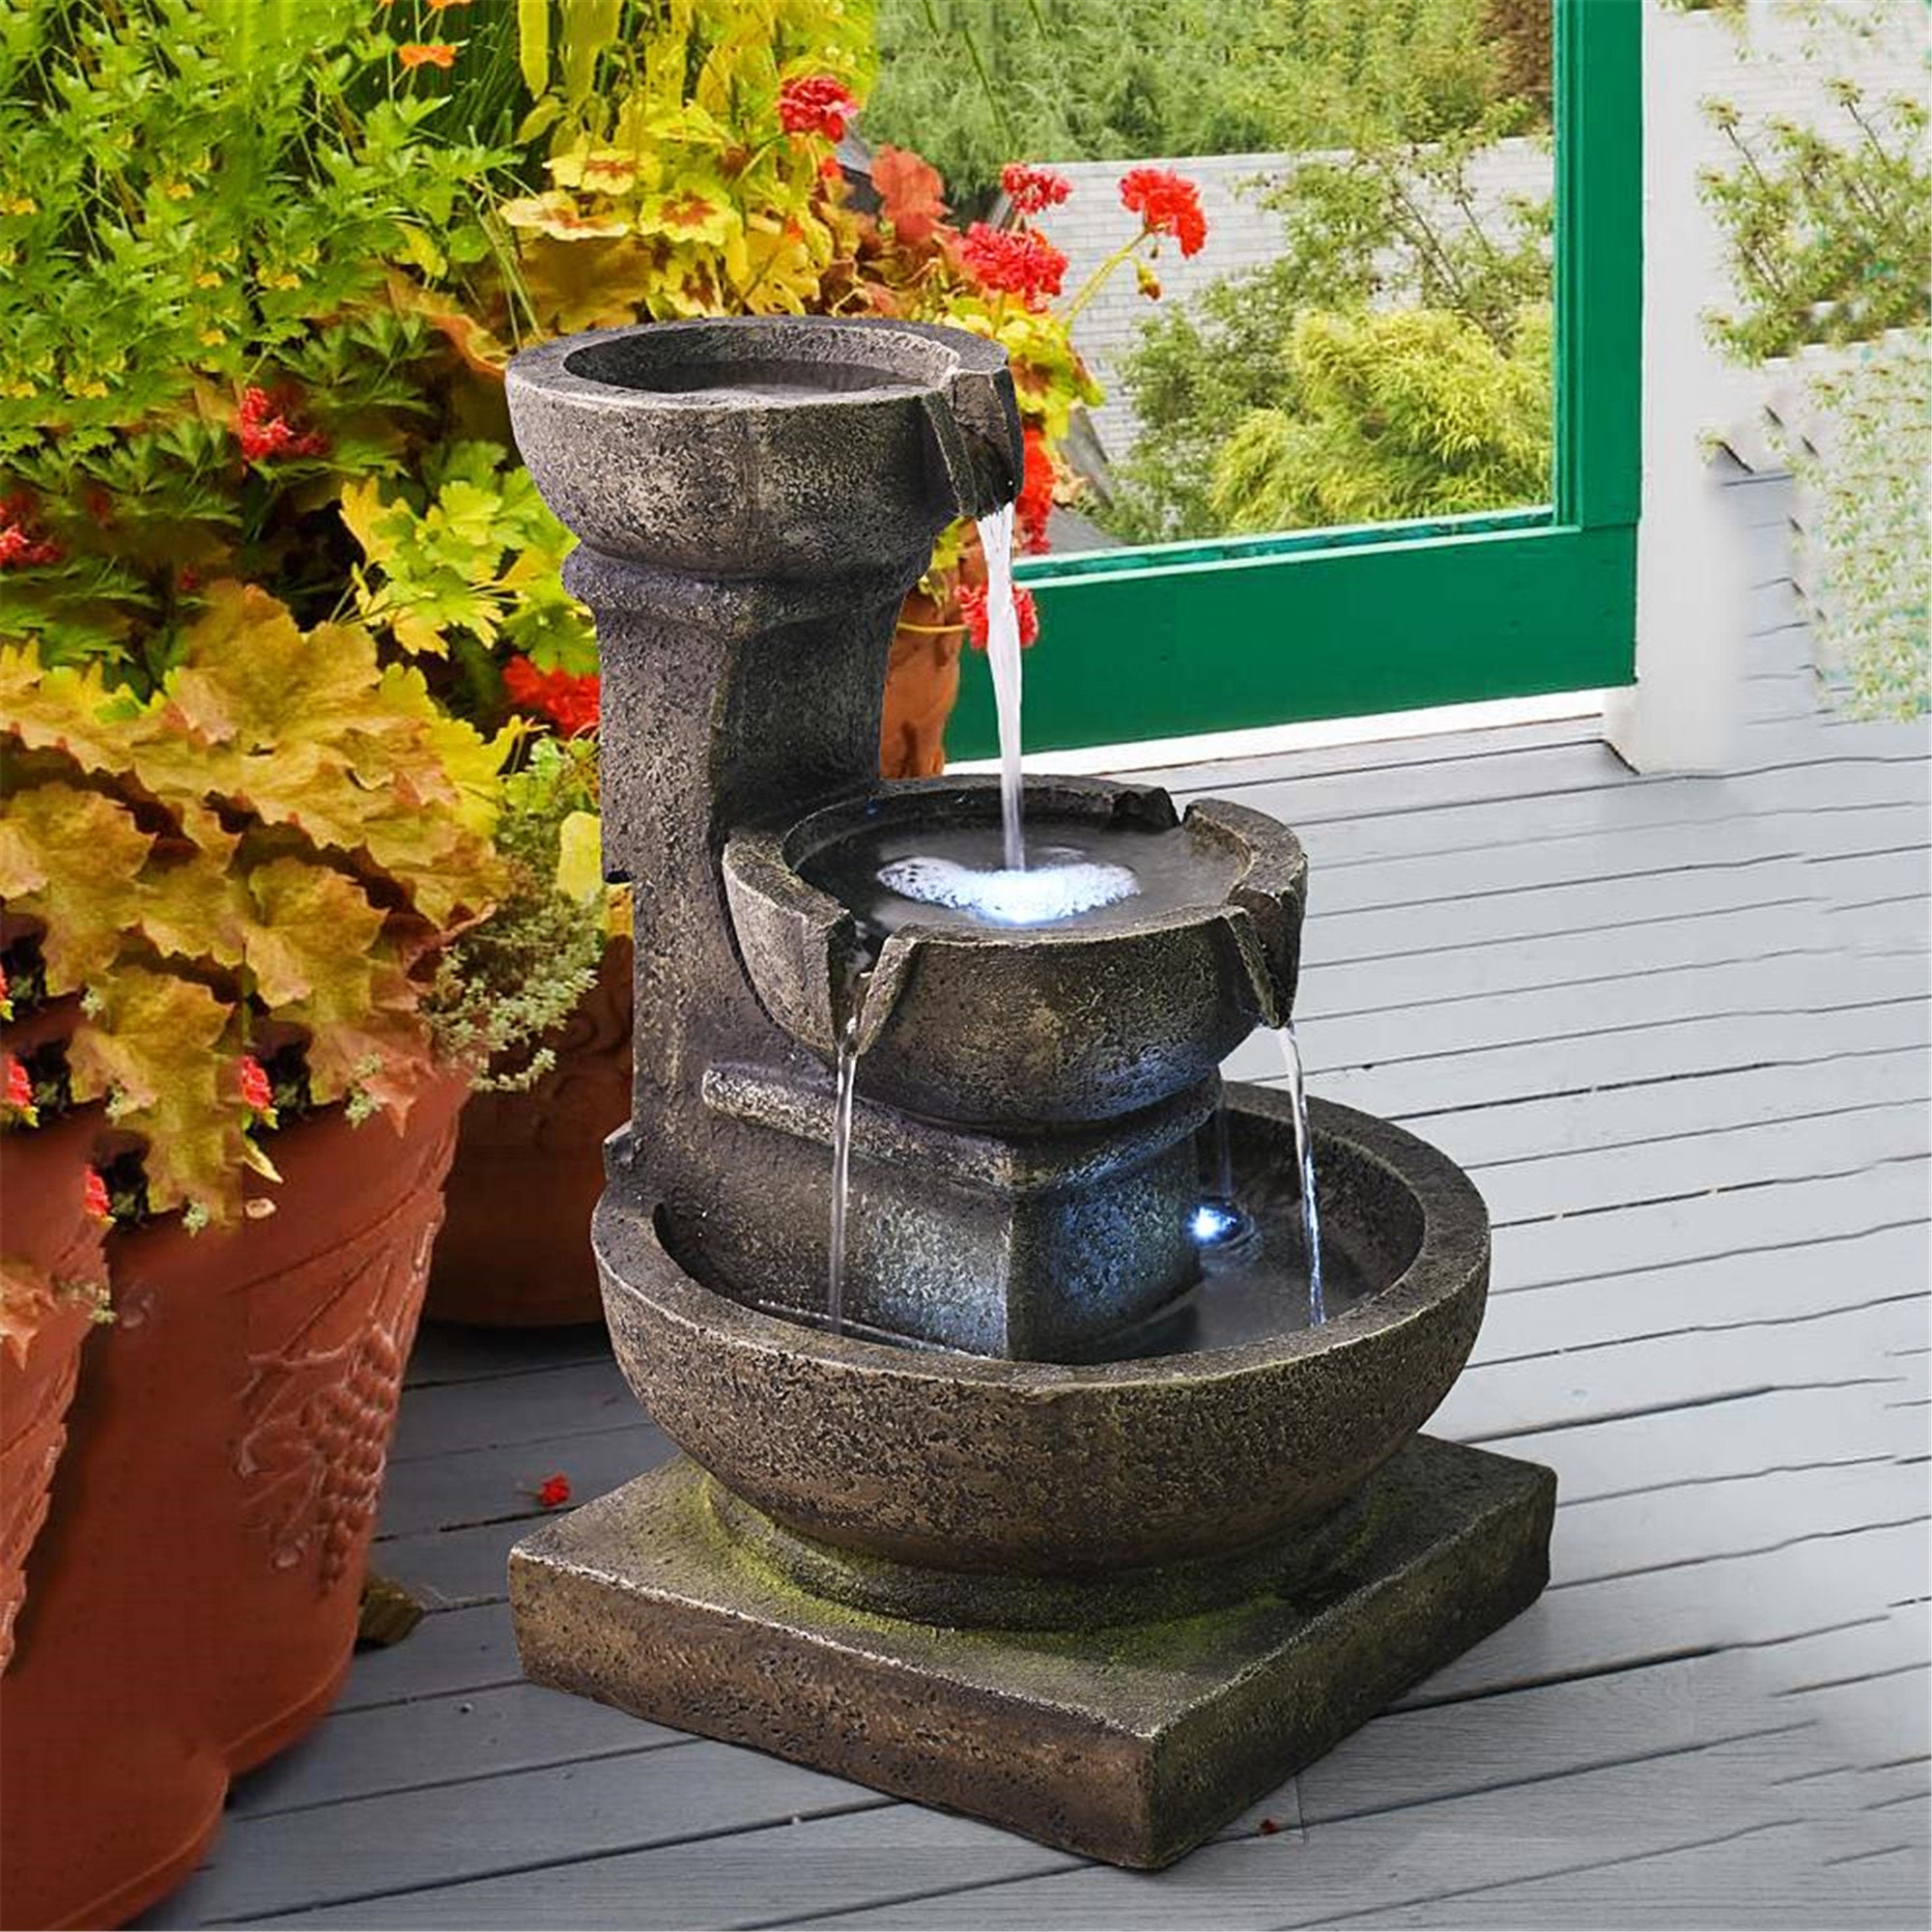 Outdoor Water Fountain with LED Light - Zen Relaxing Soothing Weatherproof Bowl Meditation Waterfall Fountain for Garden, Patio, Yard Decor